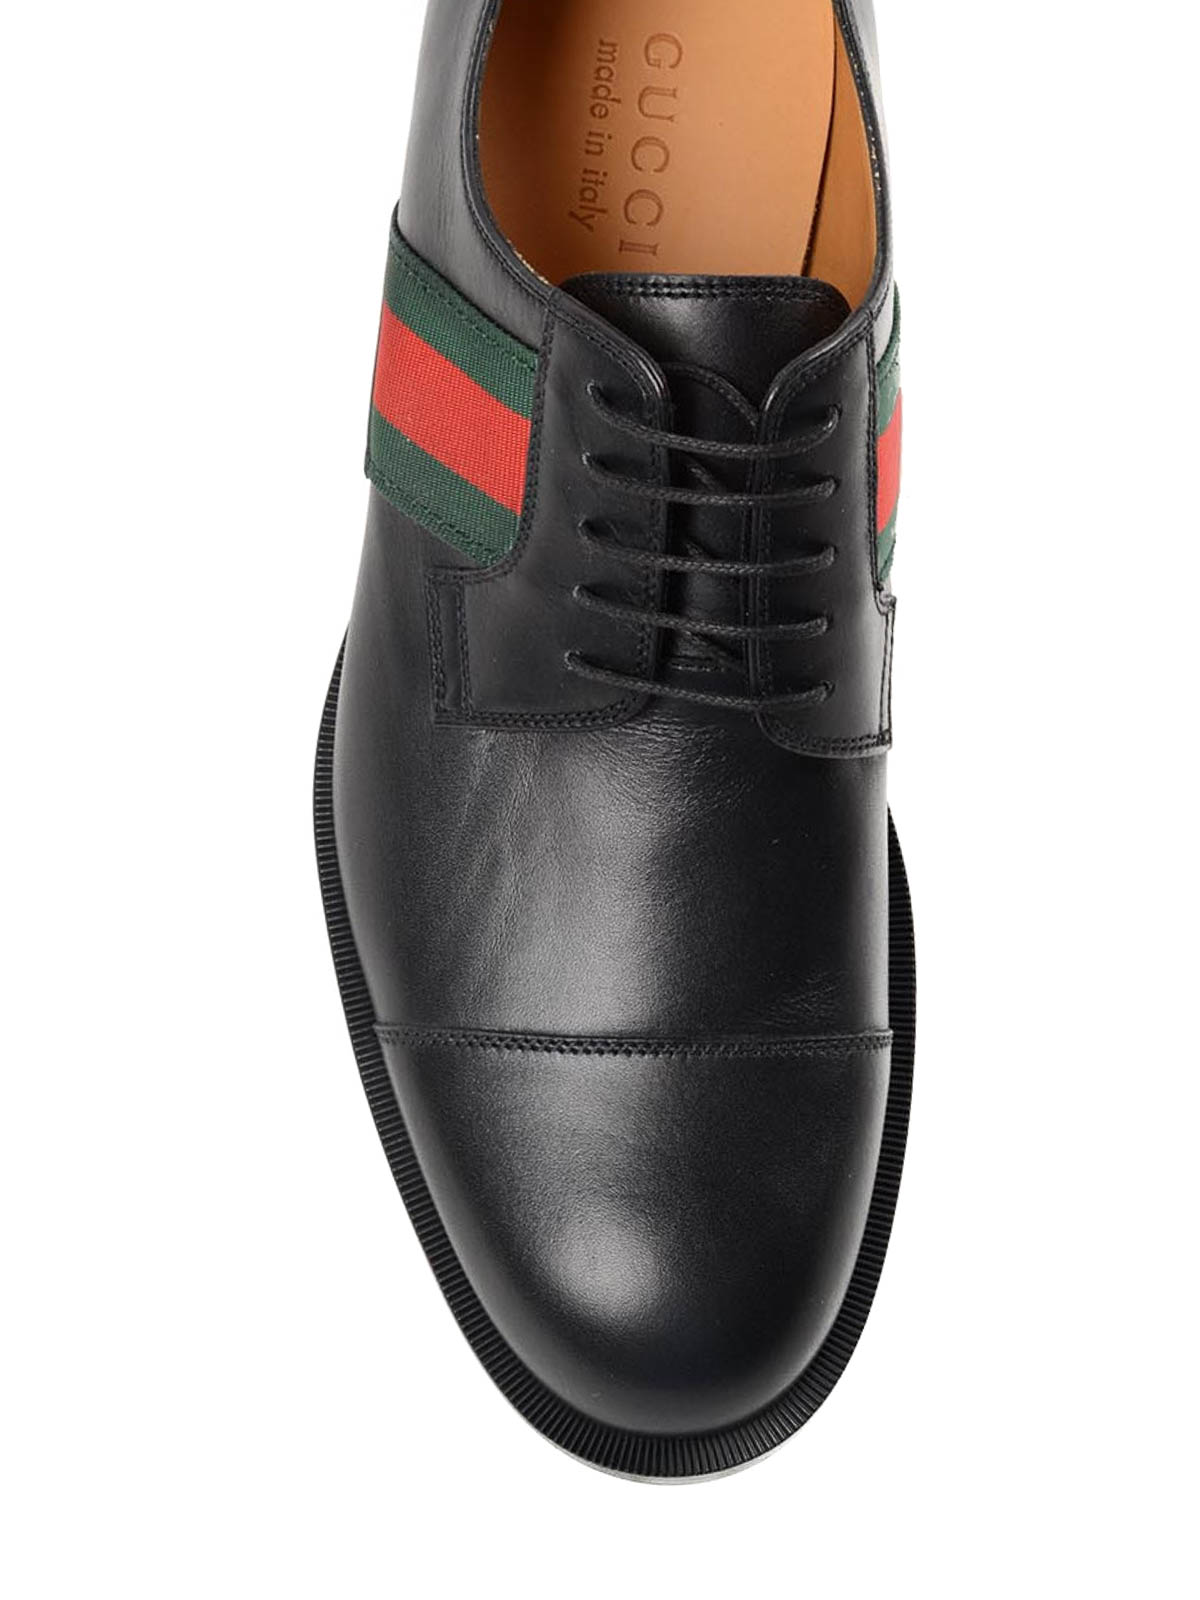 Buy Gucci Sneakers & Casual shoes for Men Online